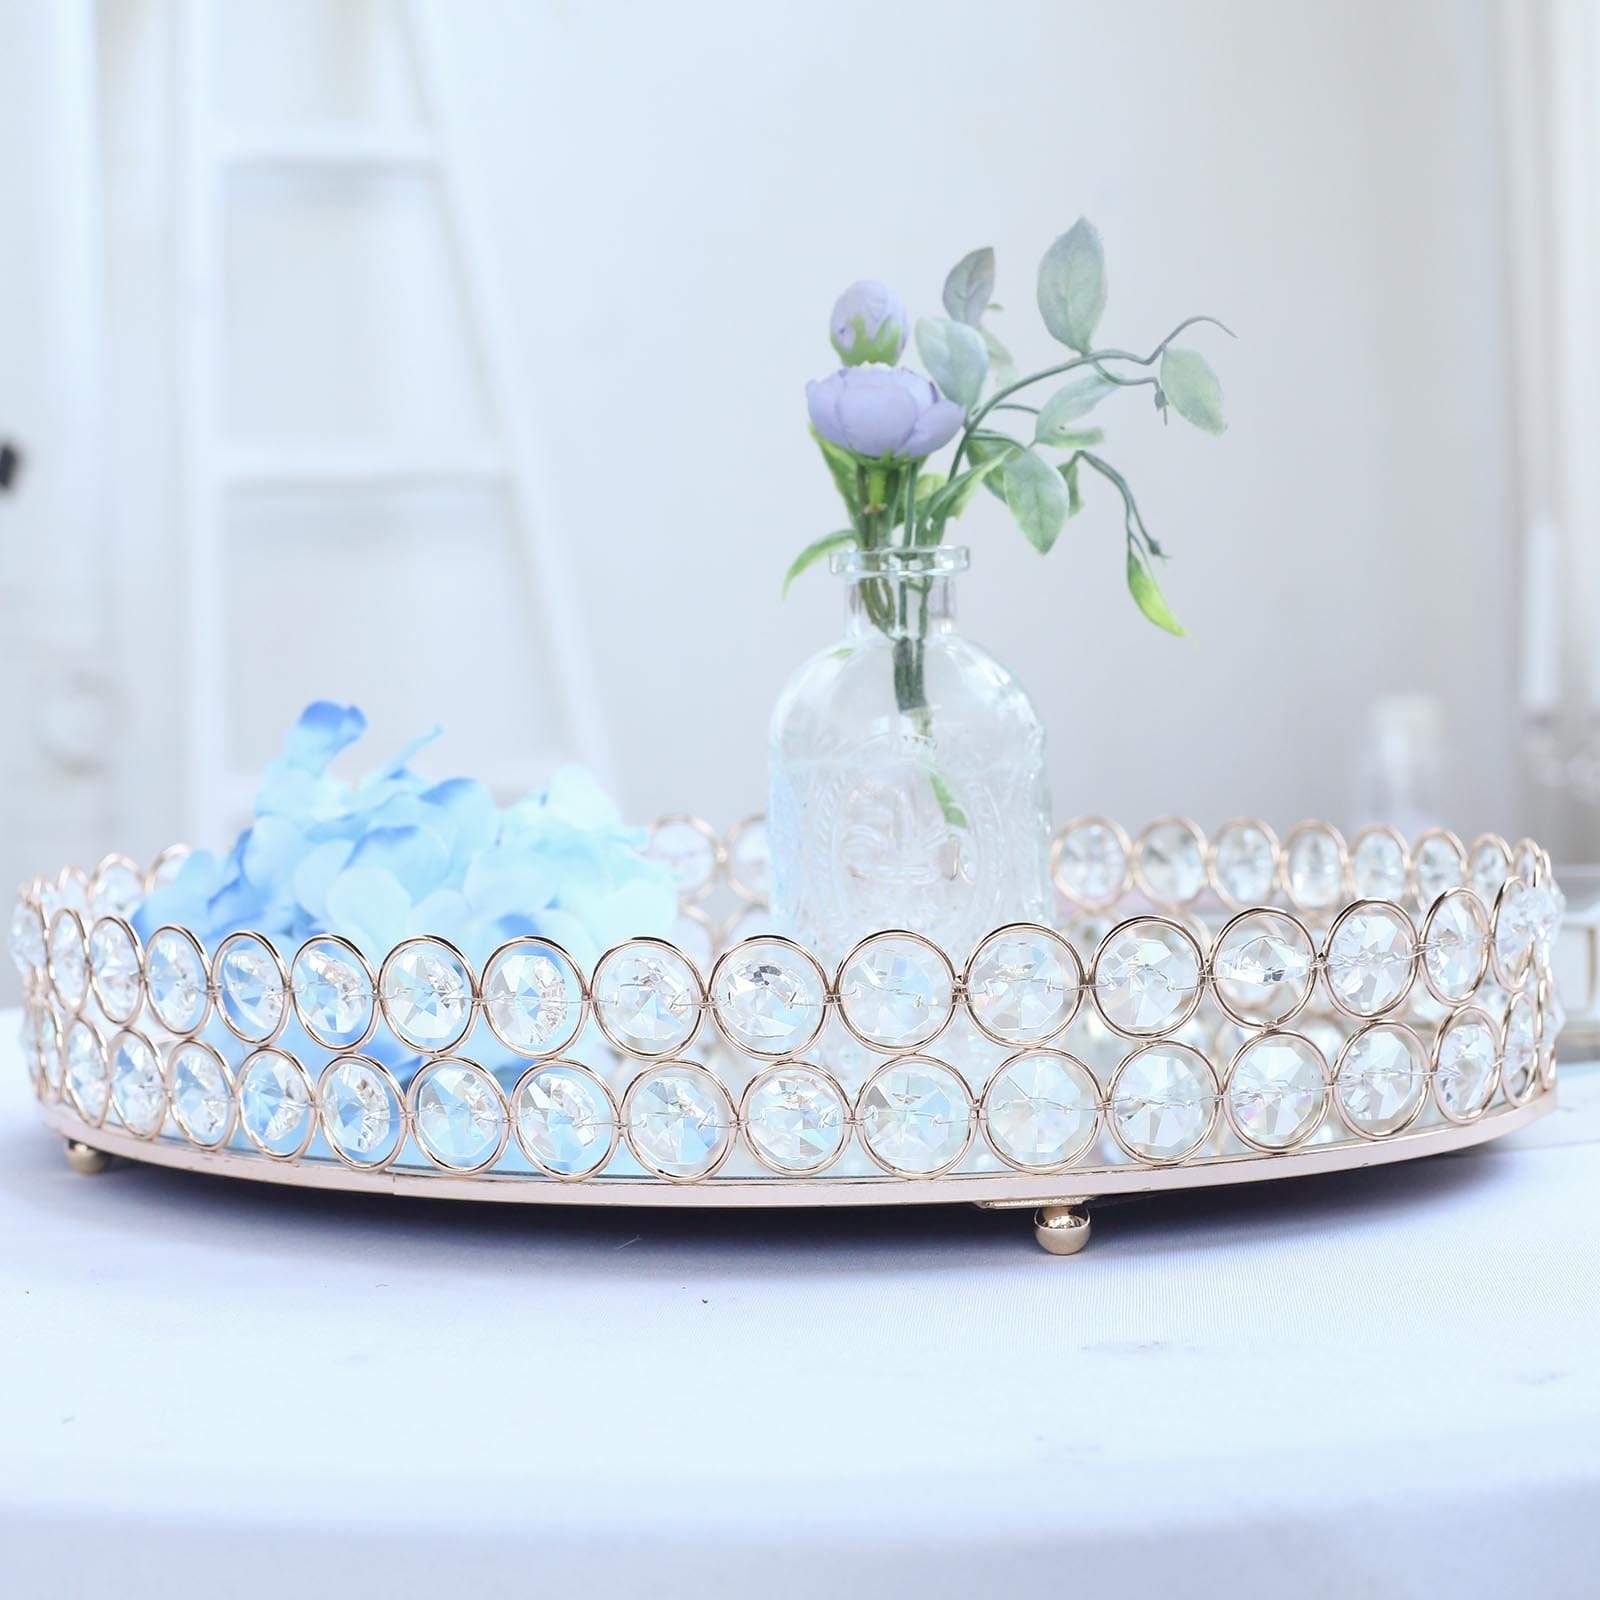 Gold Oval Metal with Crystal Beads Mirror Serving Tray